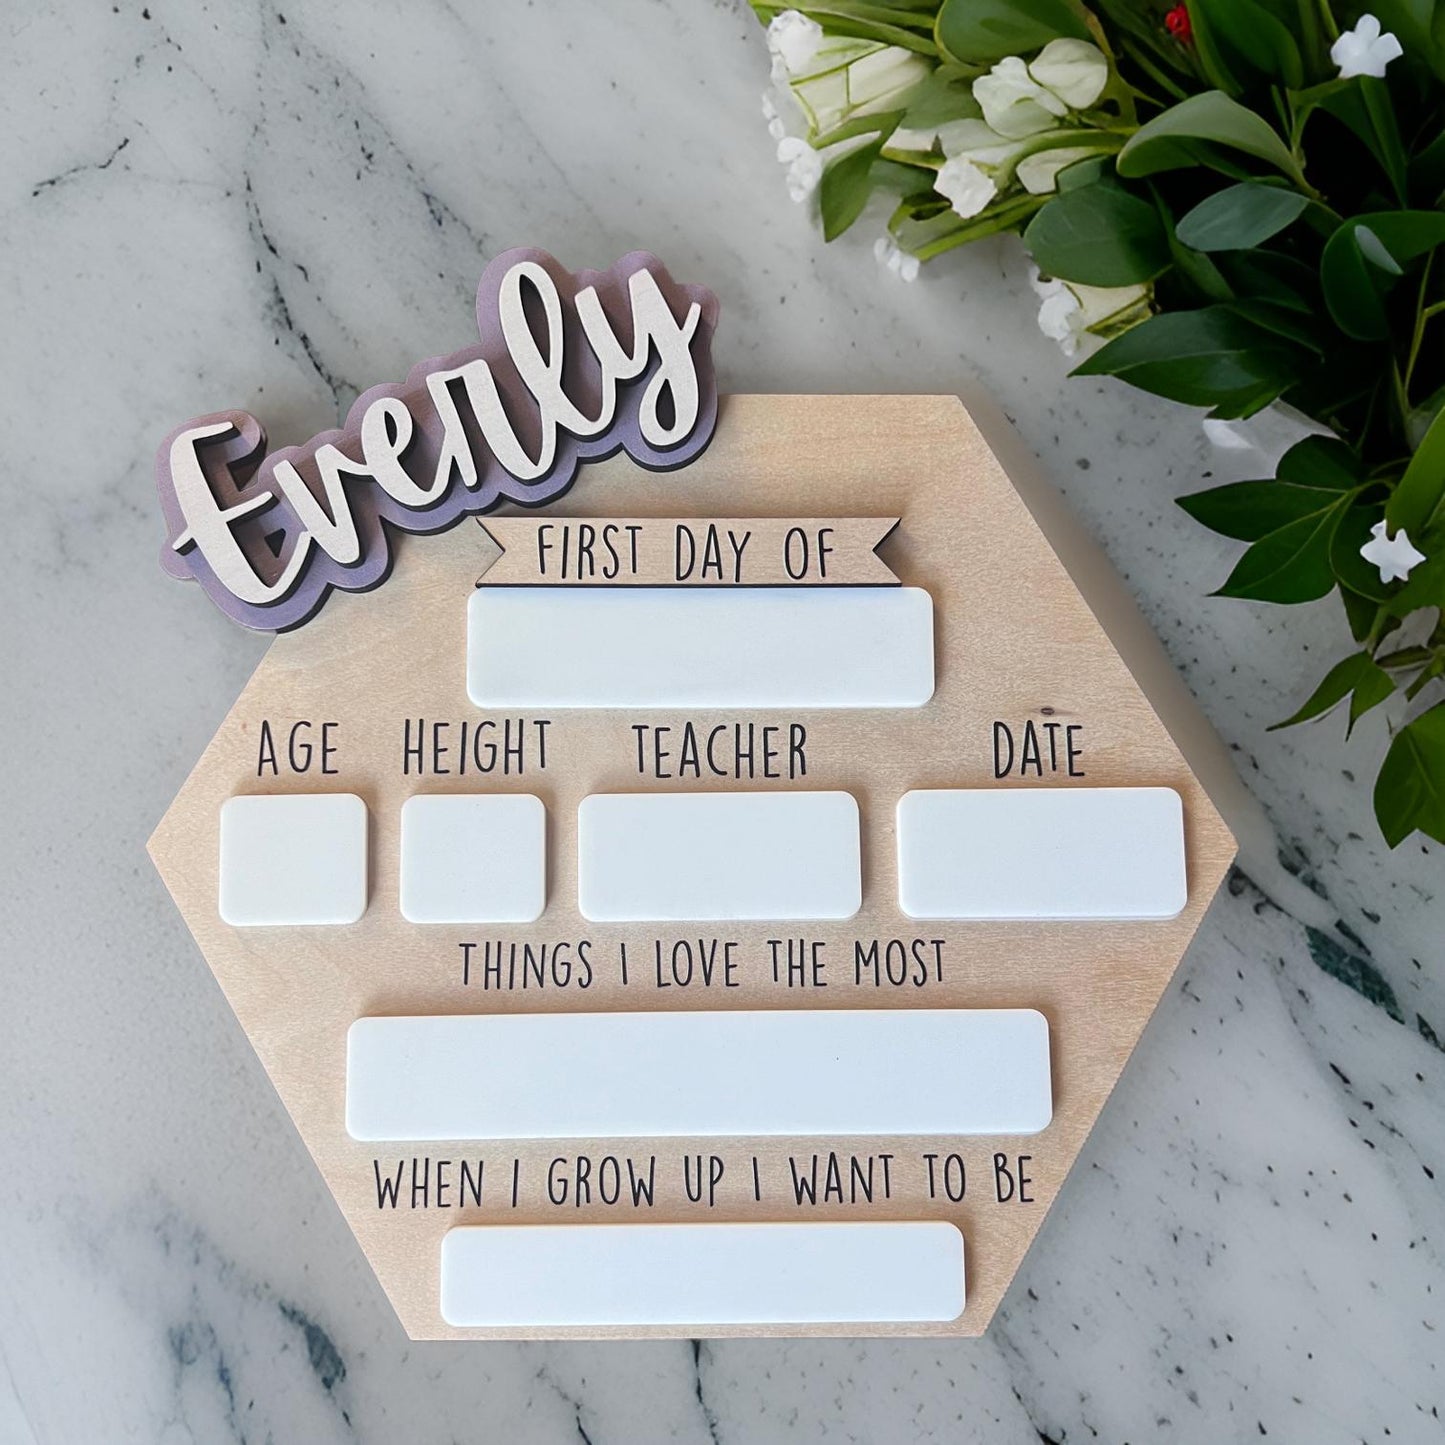 Personalized back to school hexagon sign, interchangeable names, first and last day of school